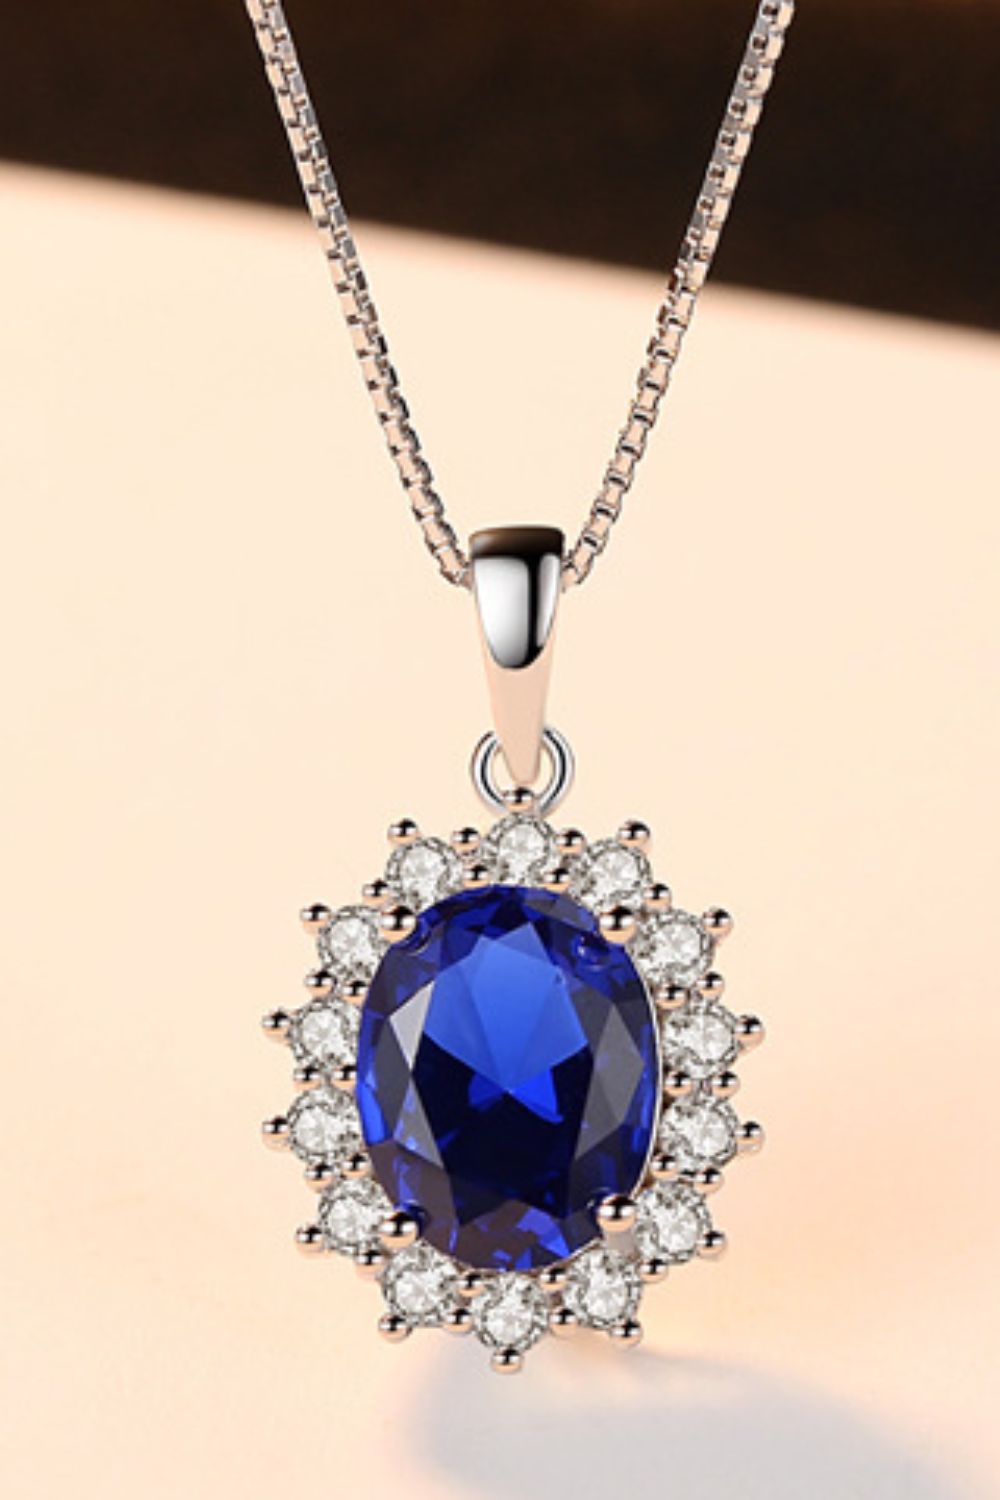 Sparkling Sapphire Pendant 925 Sterling Silver Necklace